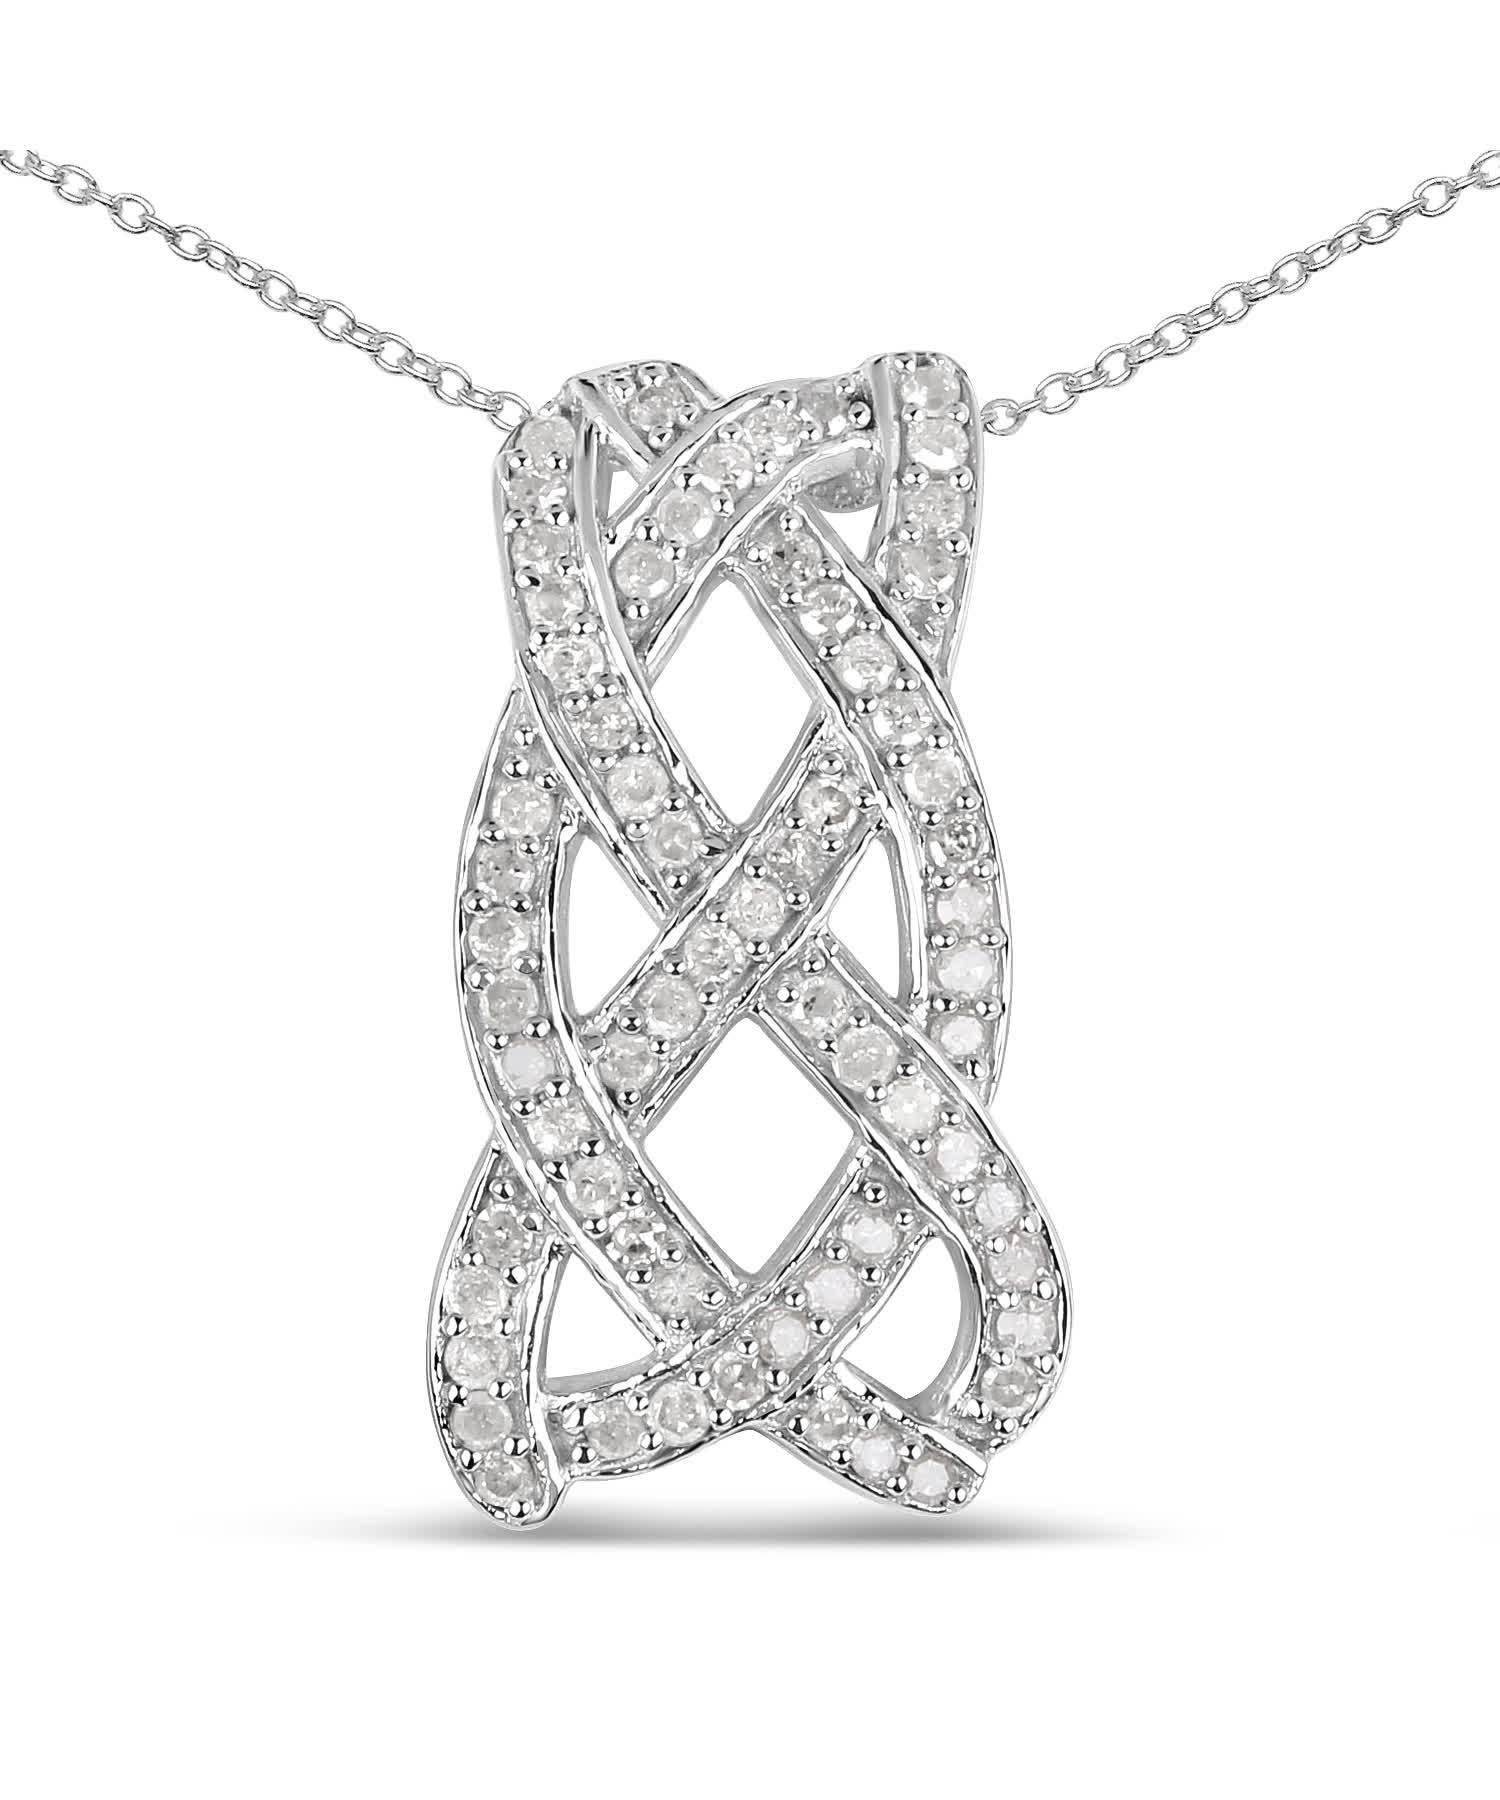 0.54ctw Icy Diamond Rhodium Plated 925 Sterling Silver Pendant With Chain View 1